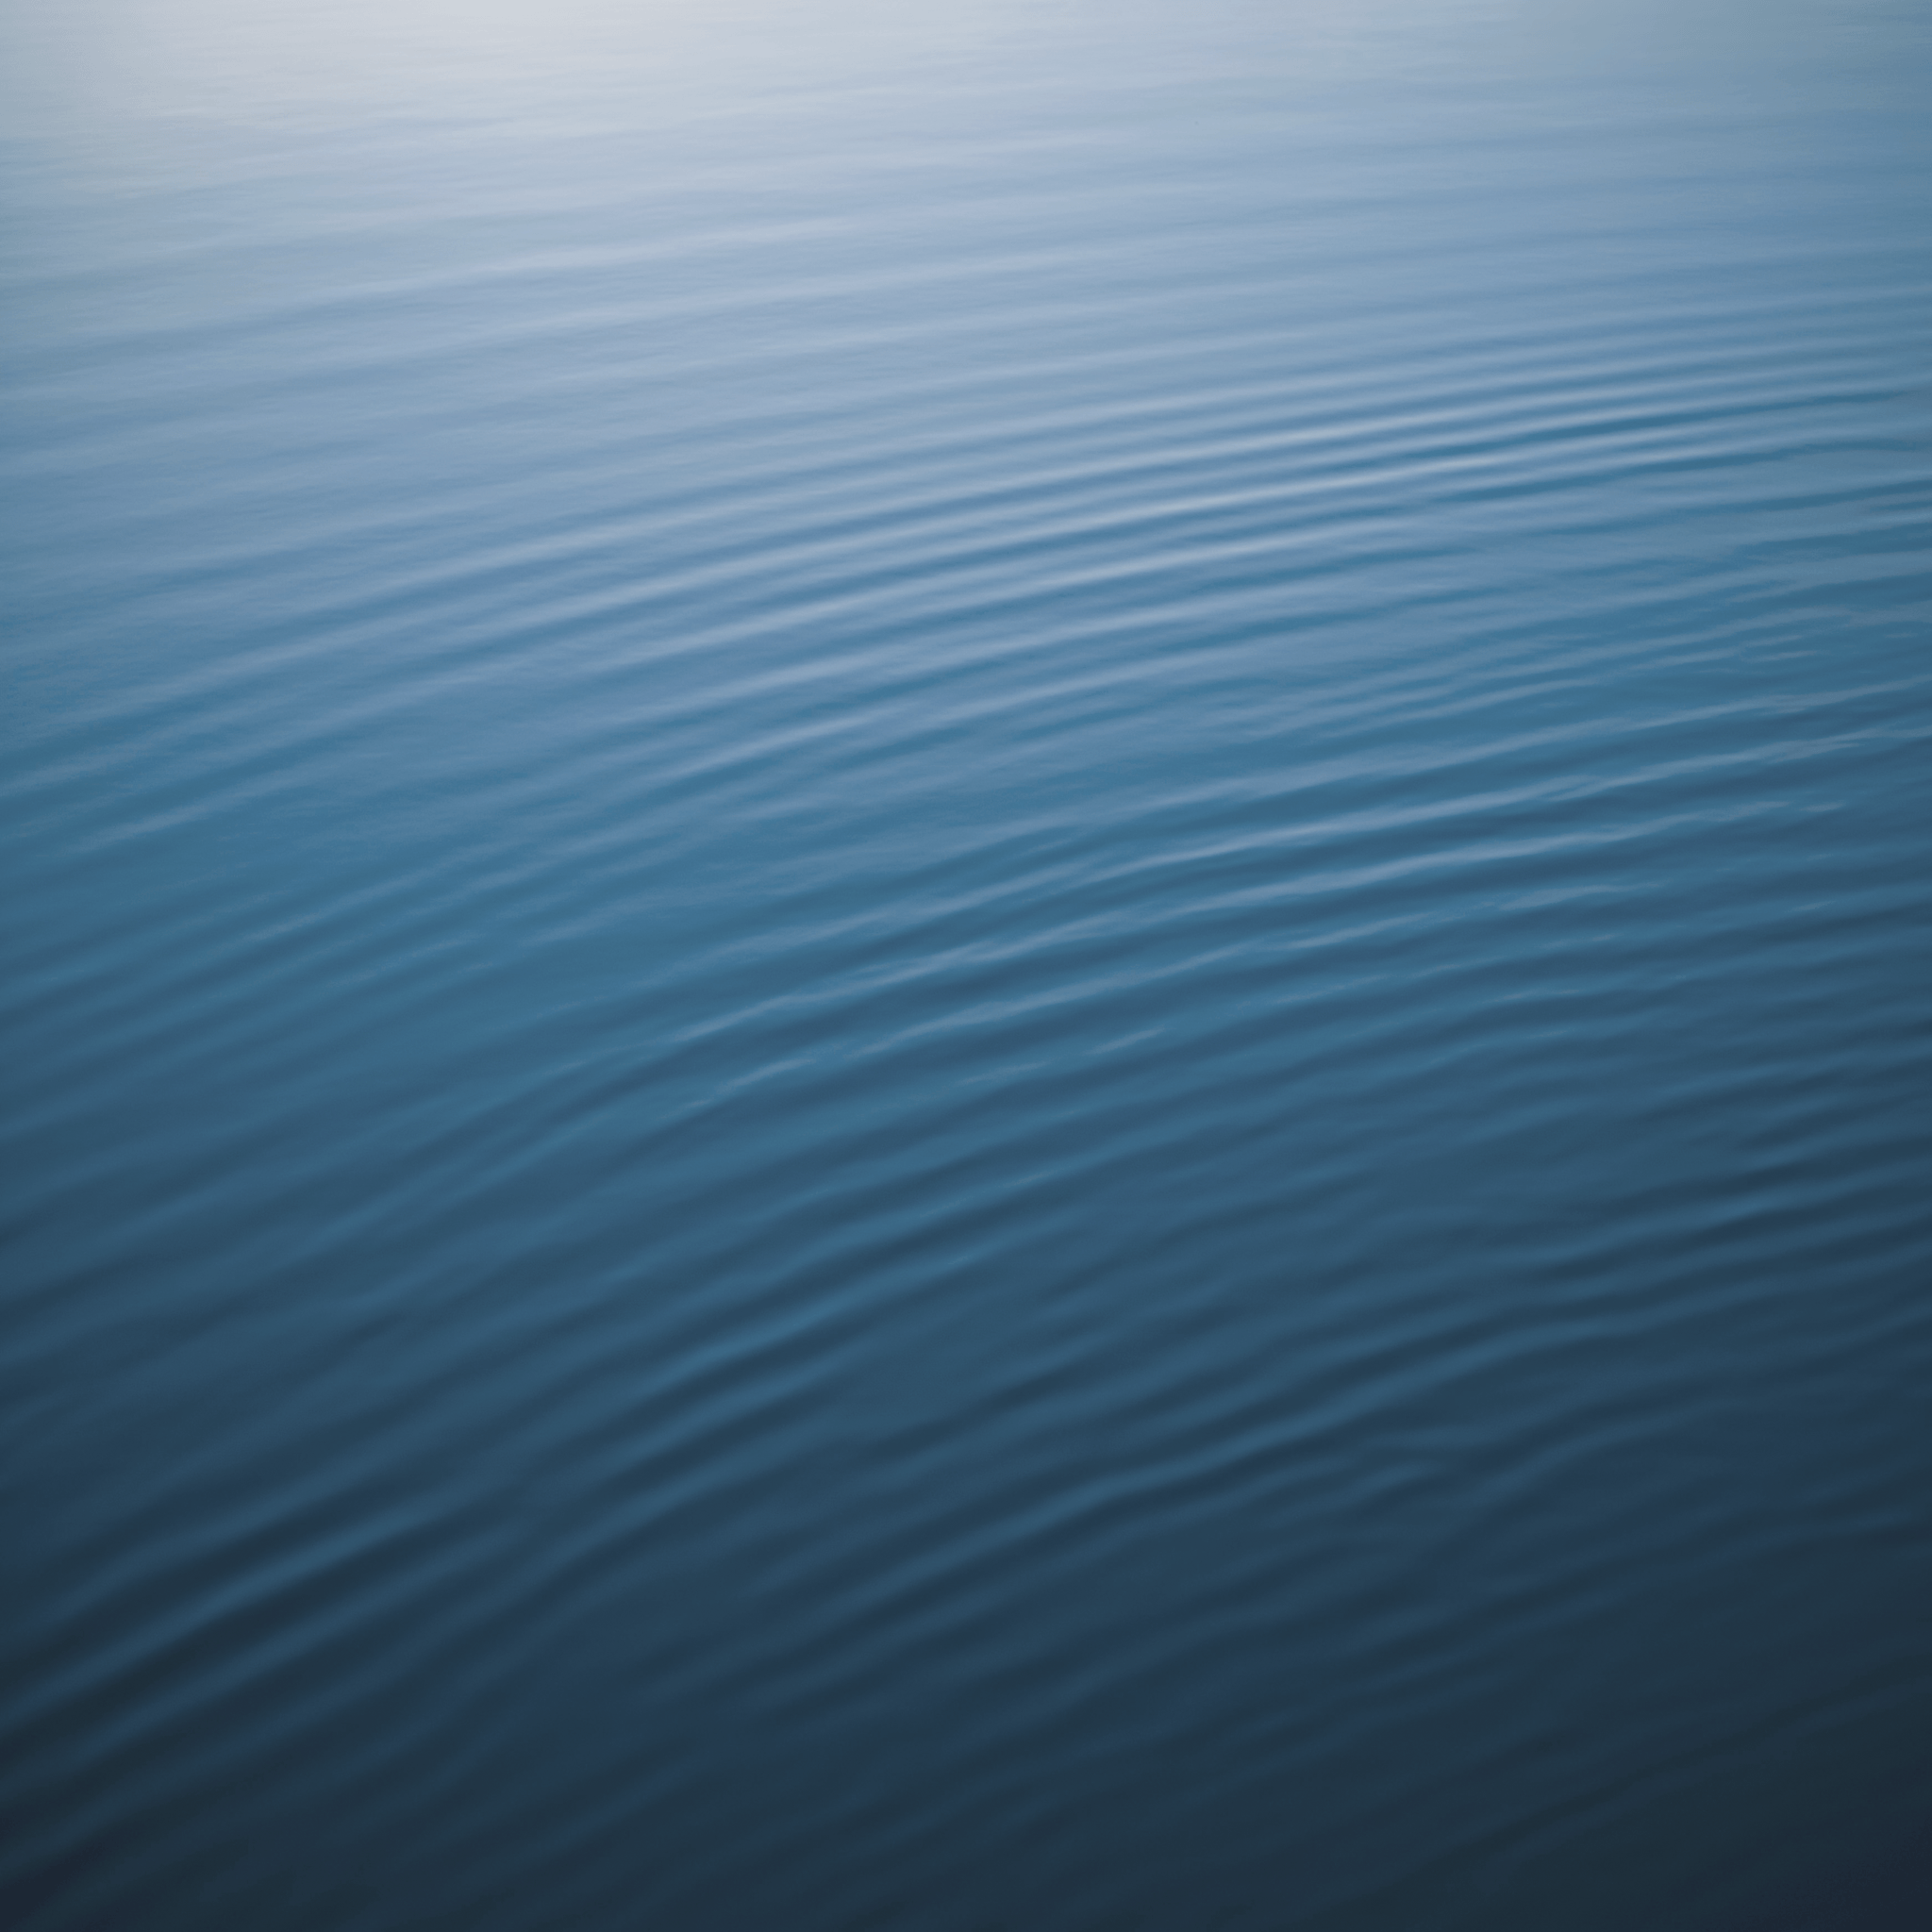 iOS 6: Get the New iOS 6 Default Wallpaper Now: Rippled Water. OS X